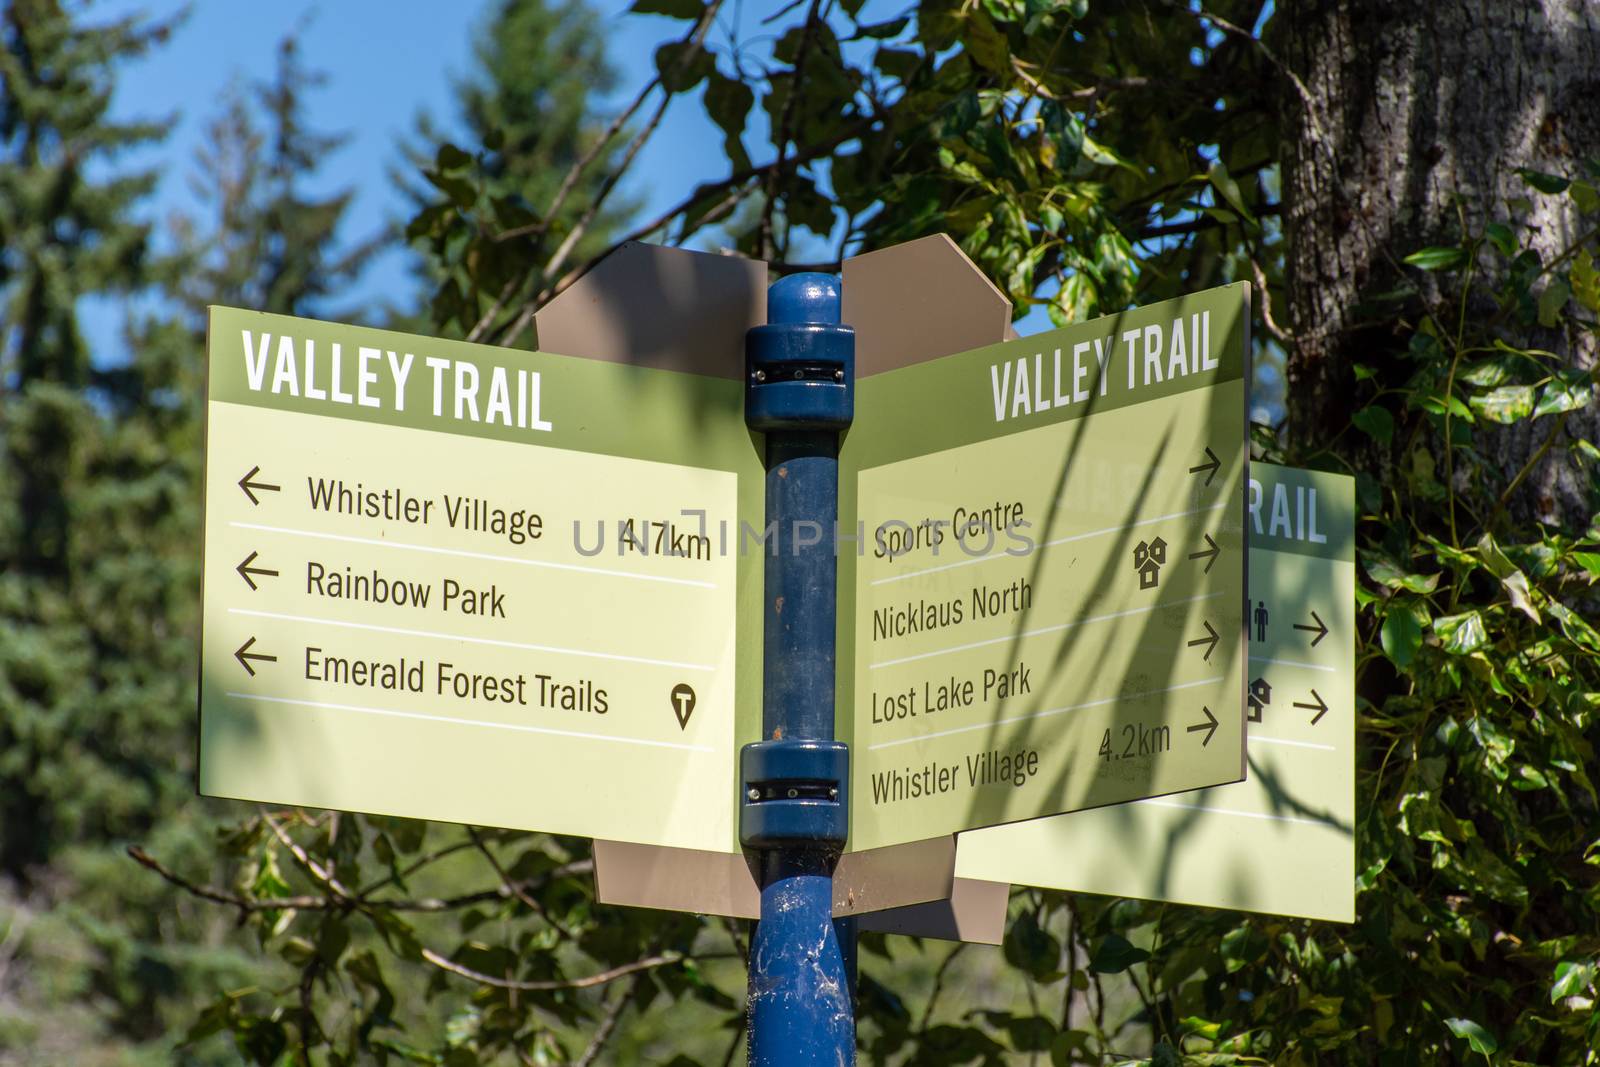 Valley Trail Crossroad Sign in Whistler, British Columbia, Canada in the summer for biking, walking, running, rollerblading enjoying nature on the way to Whistler Village.